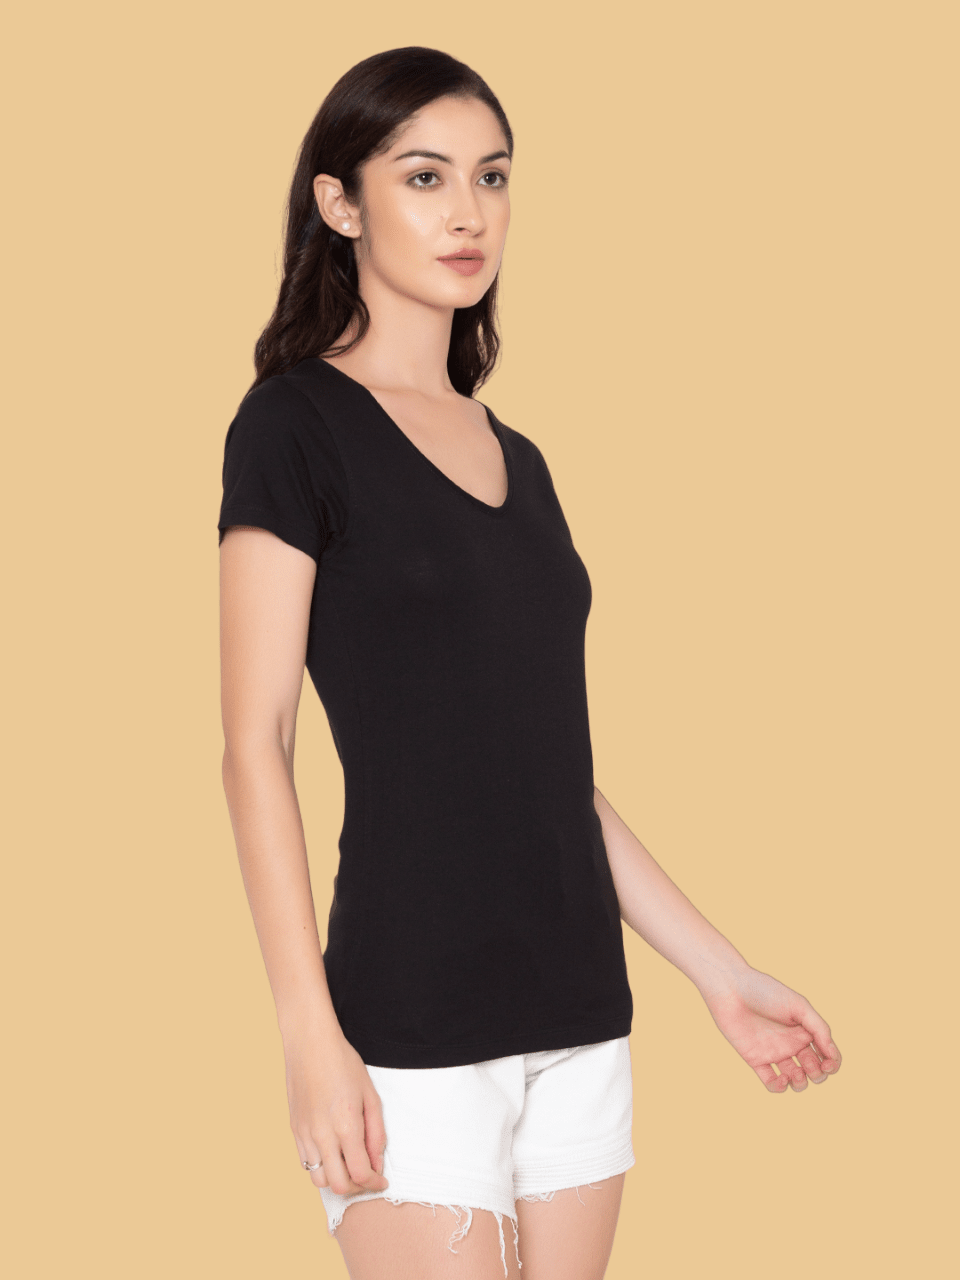 Flawless Women Black Solid Cotton T-Shirt T-Shirt Being Flawless 